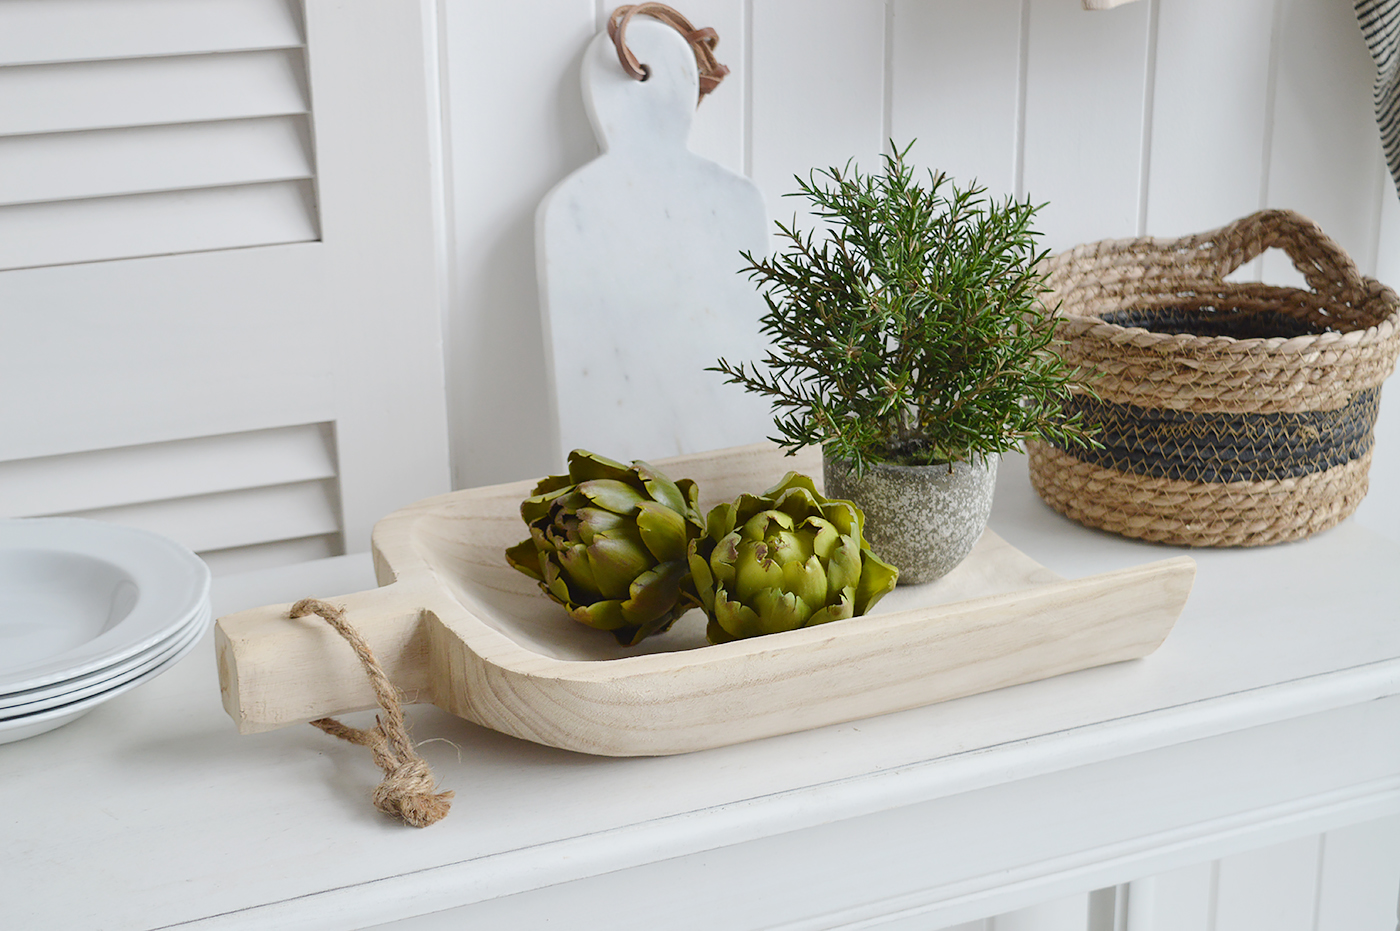 Artificial Green artichokes on a chadwick rustic wooden tray for kitchen styling the New England way!